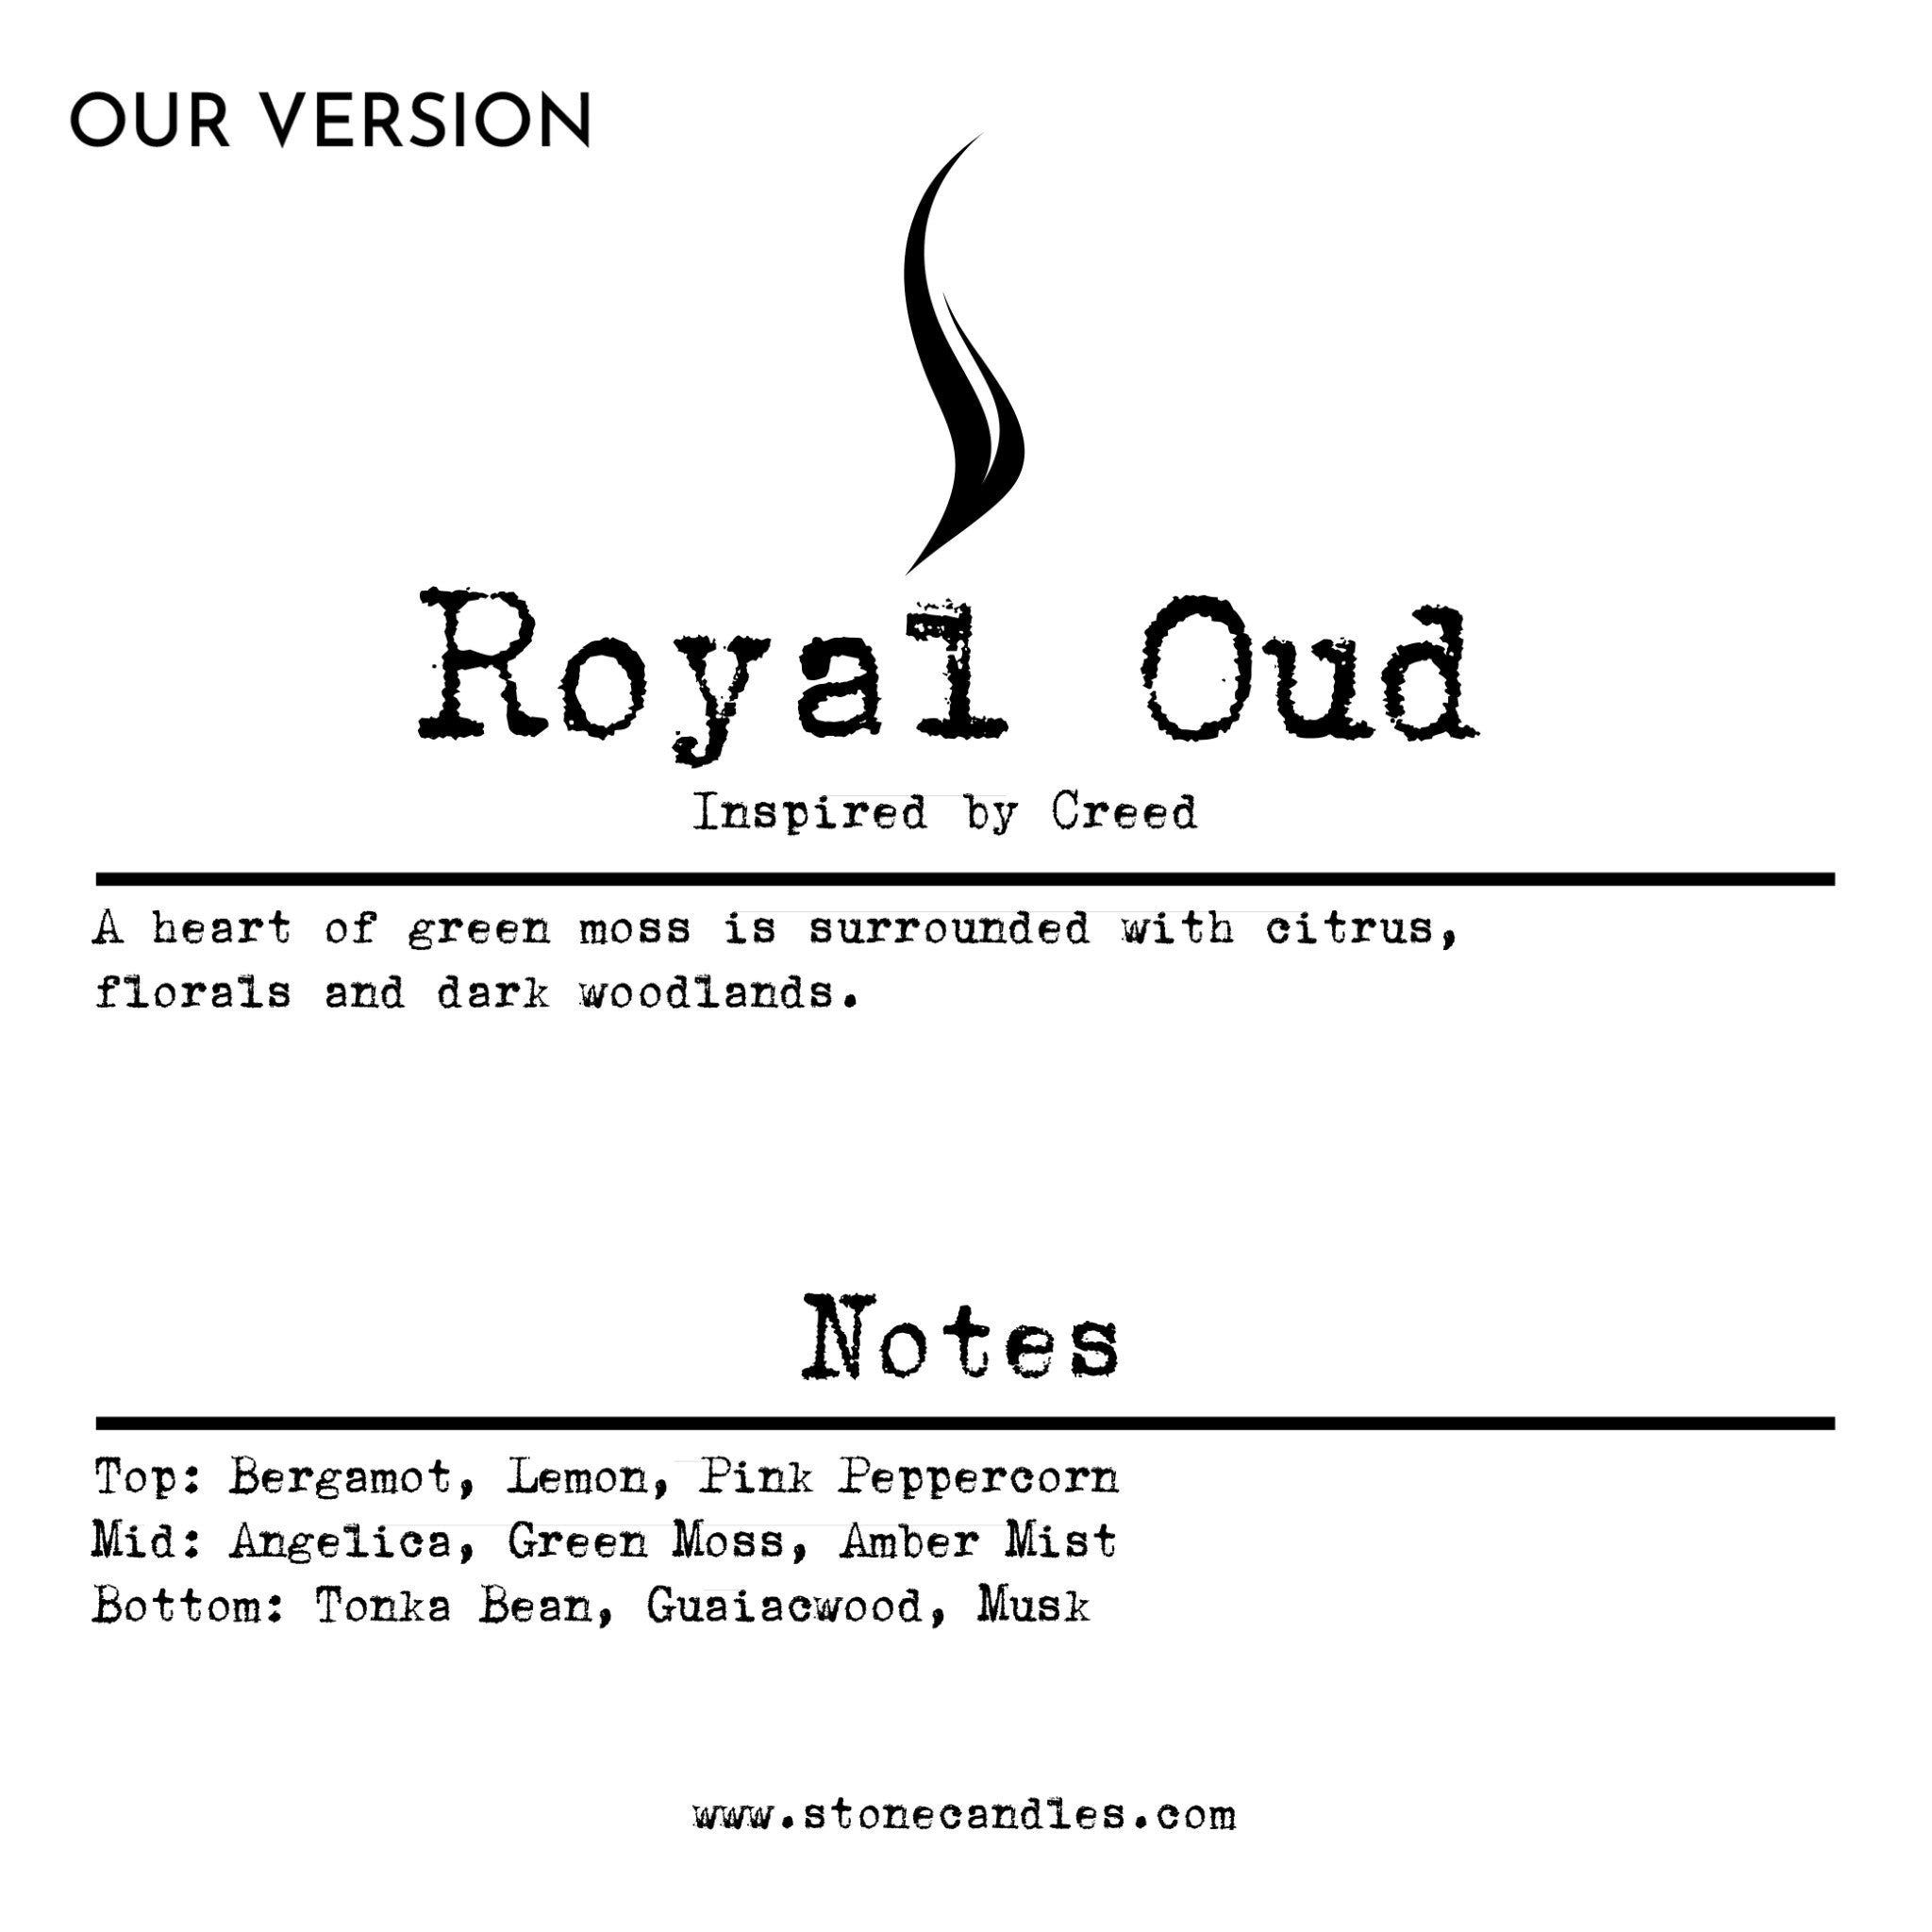 Royal Oud (our version) Sample Scent Strip